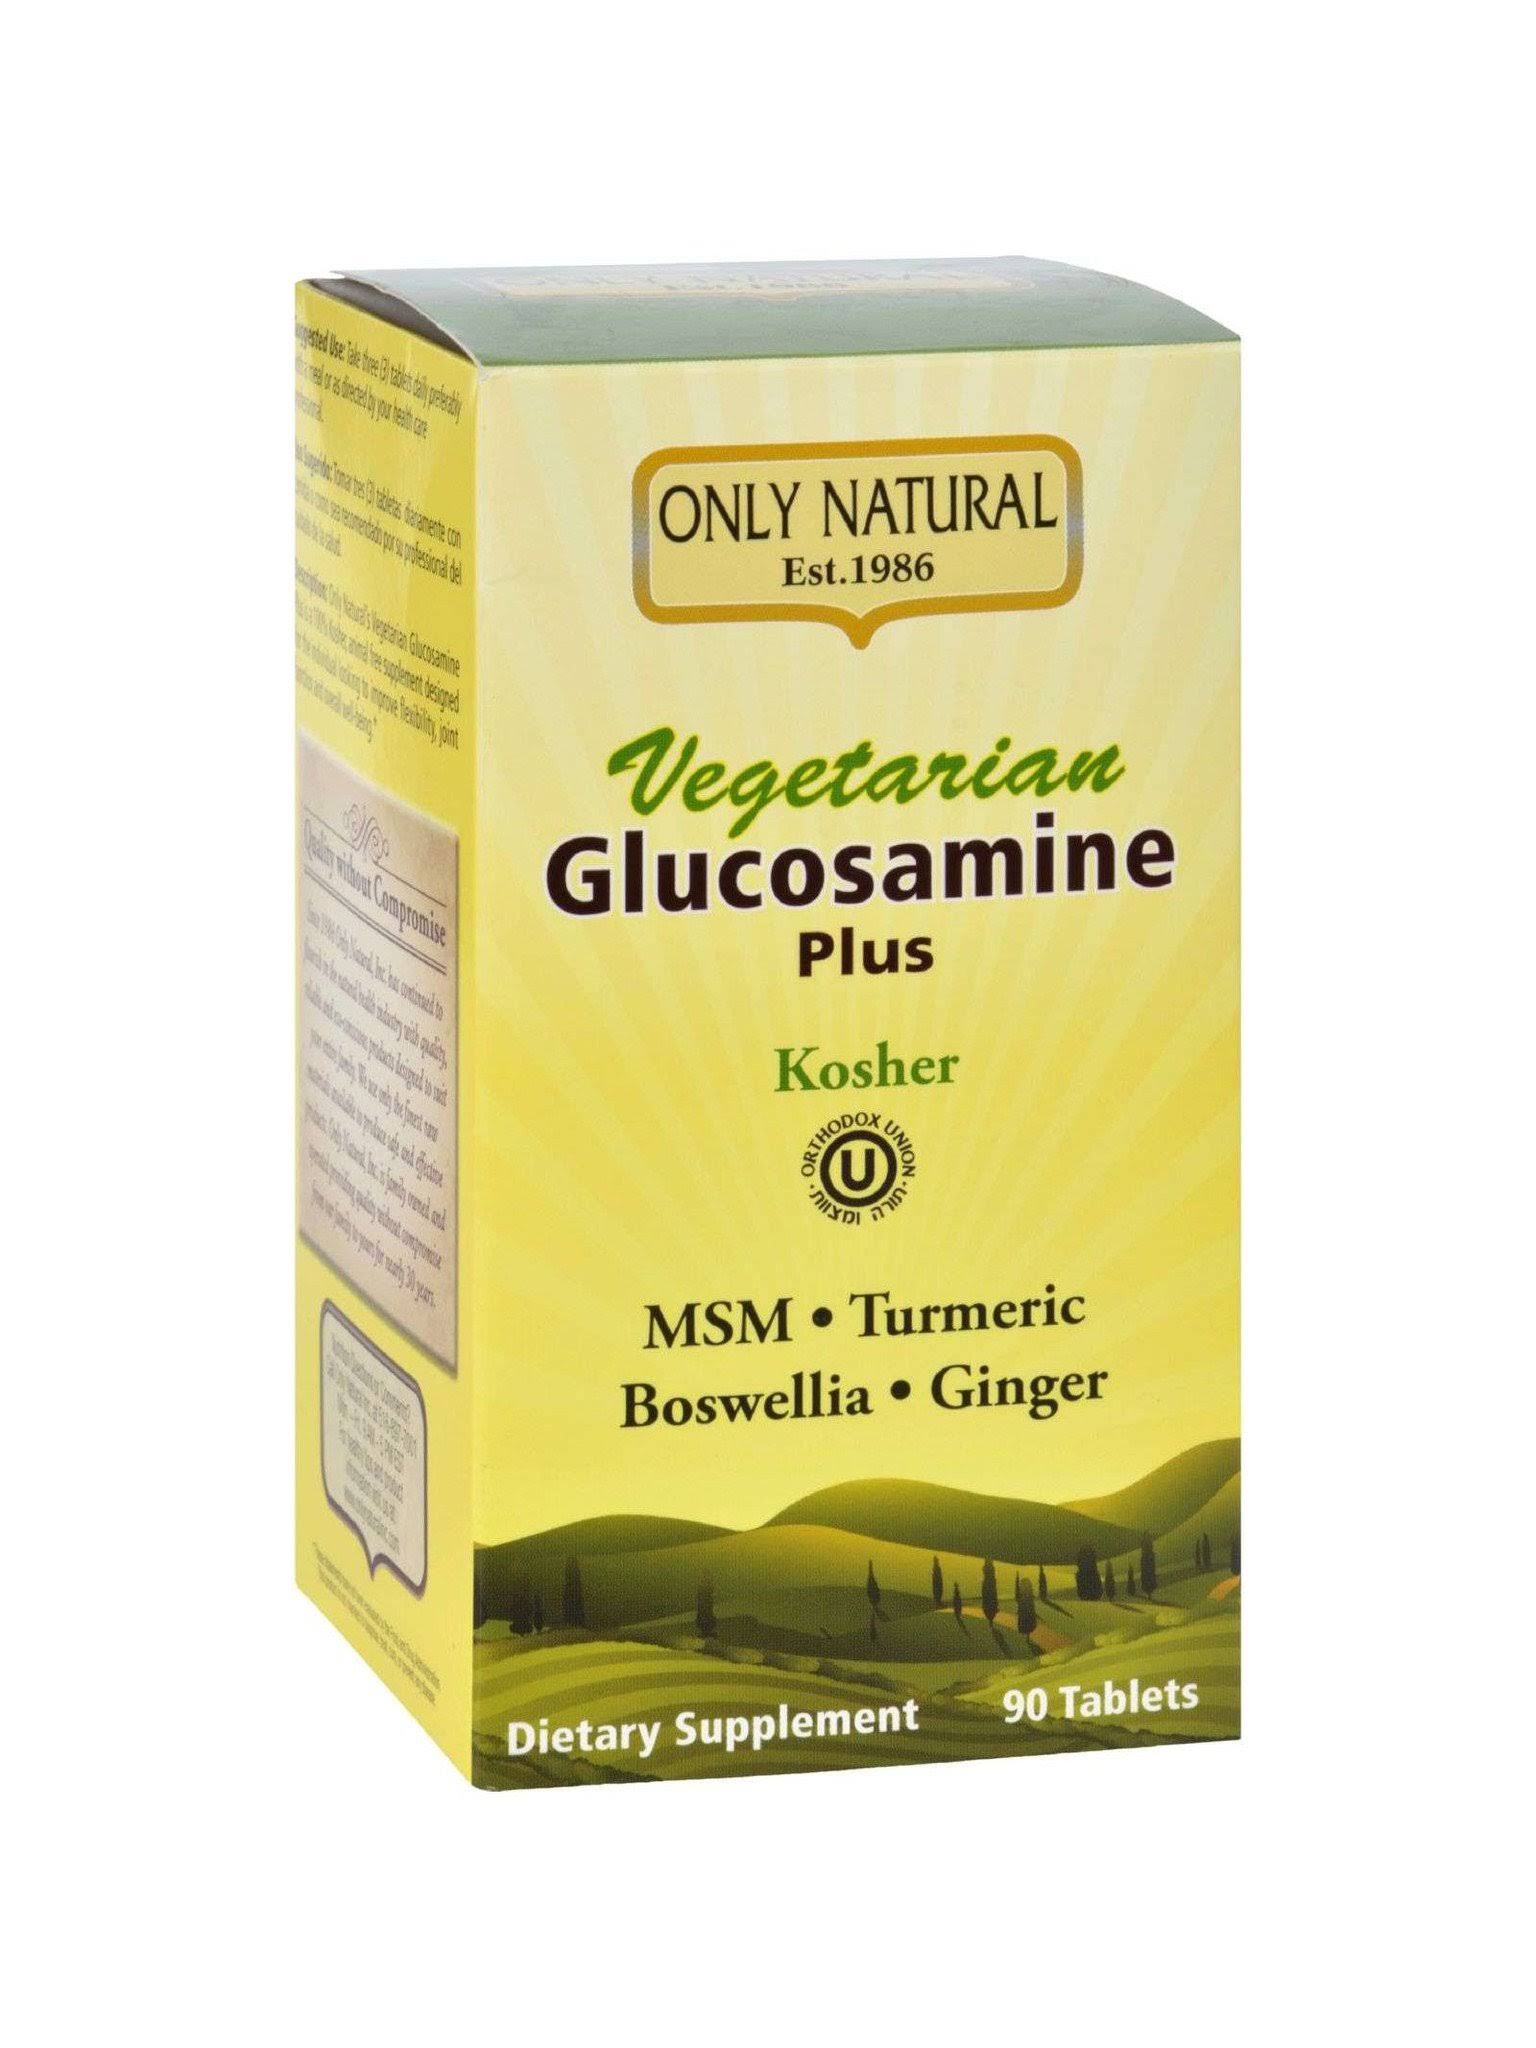 Only Natural Vegetarian Glucosamine Plus Supplement - 90 Tablets